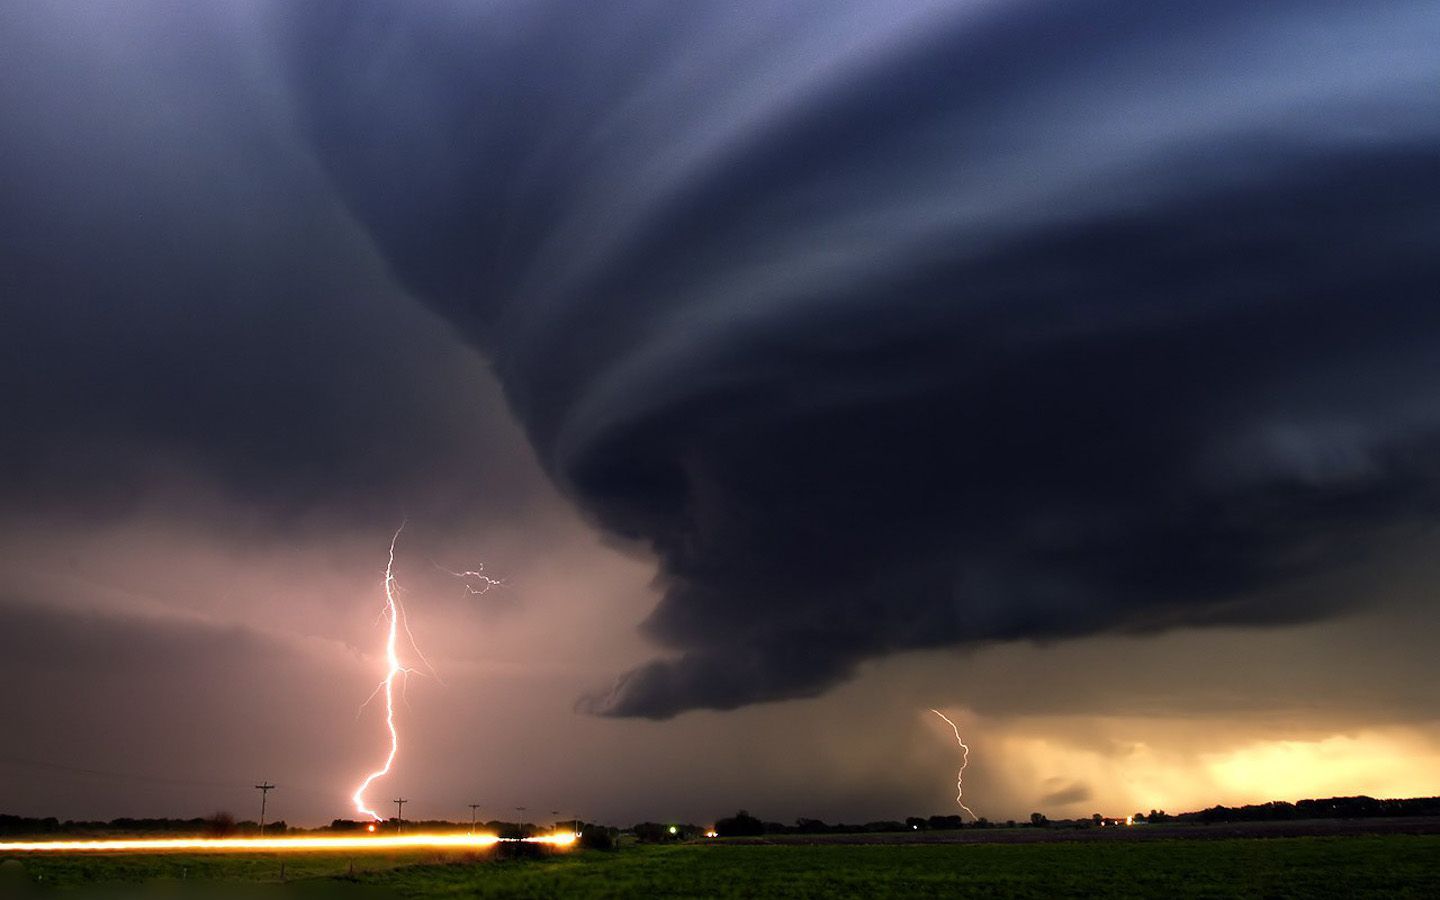 Why does God always get the blame?. Nature image, Tornado, Photo